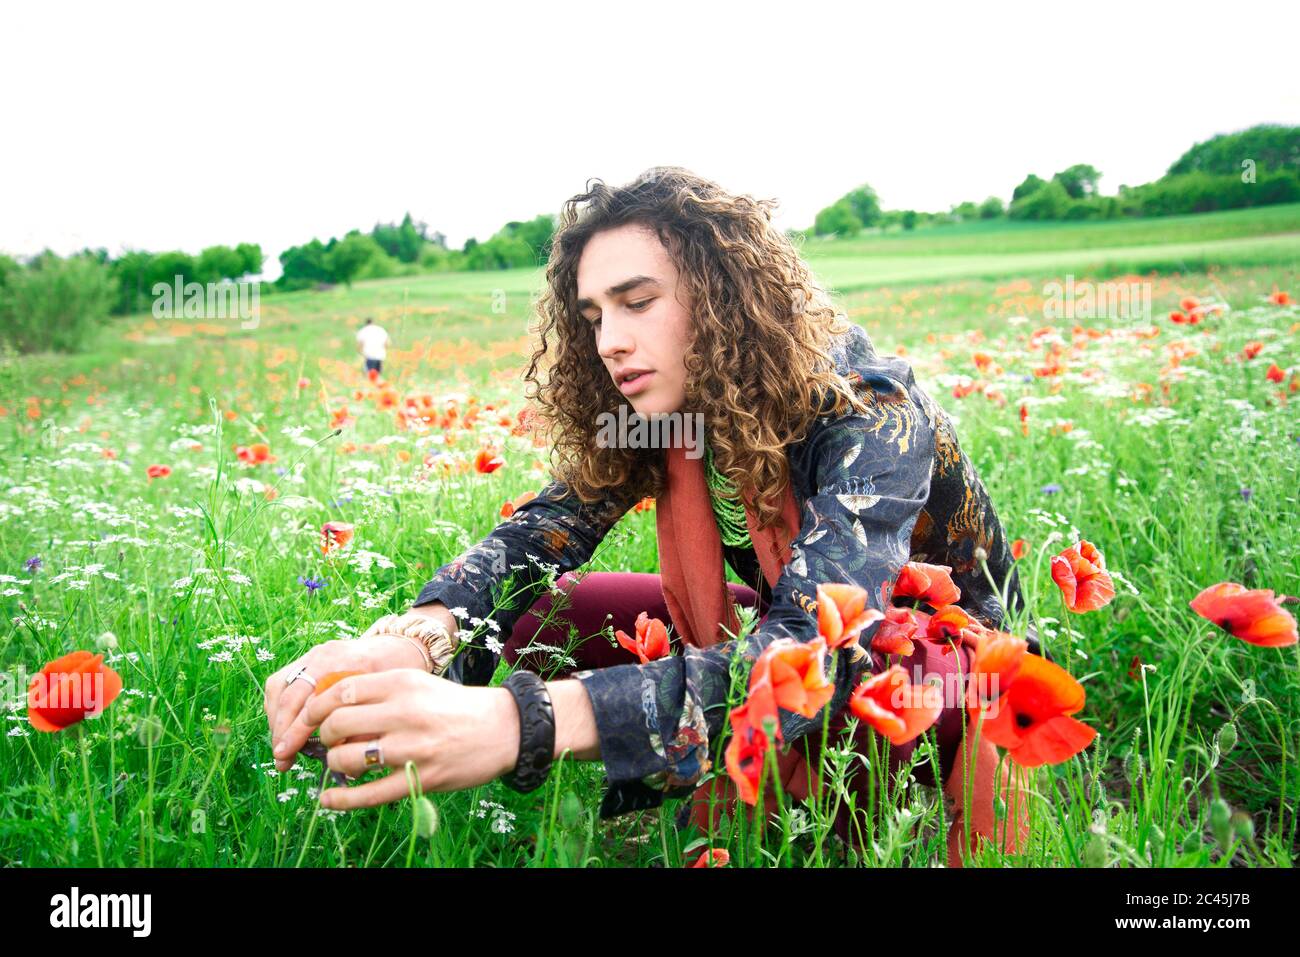 Portrait of young man with long brown curly hair sitting in a poppy meadow Stock Photo